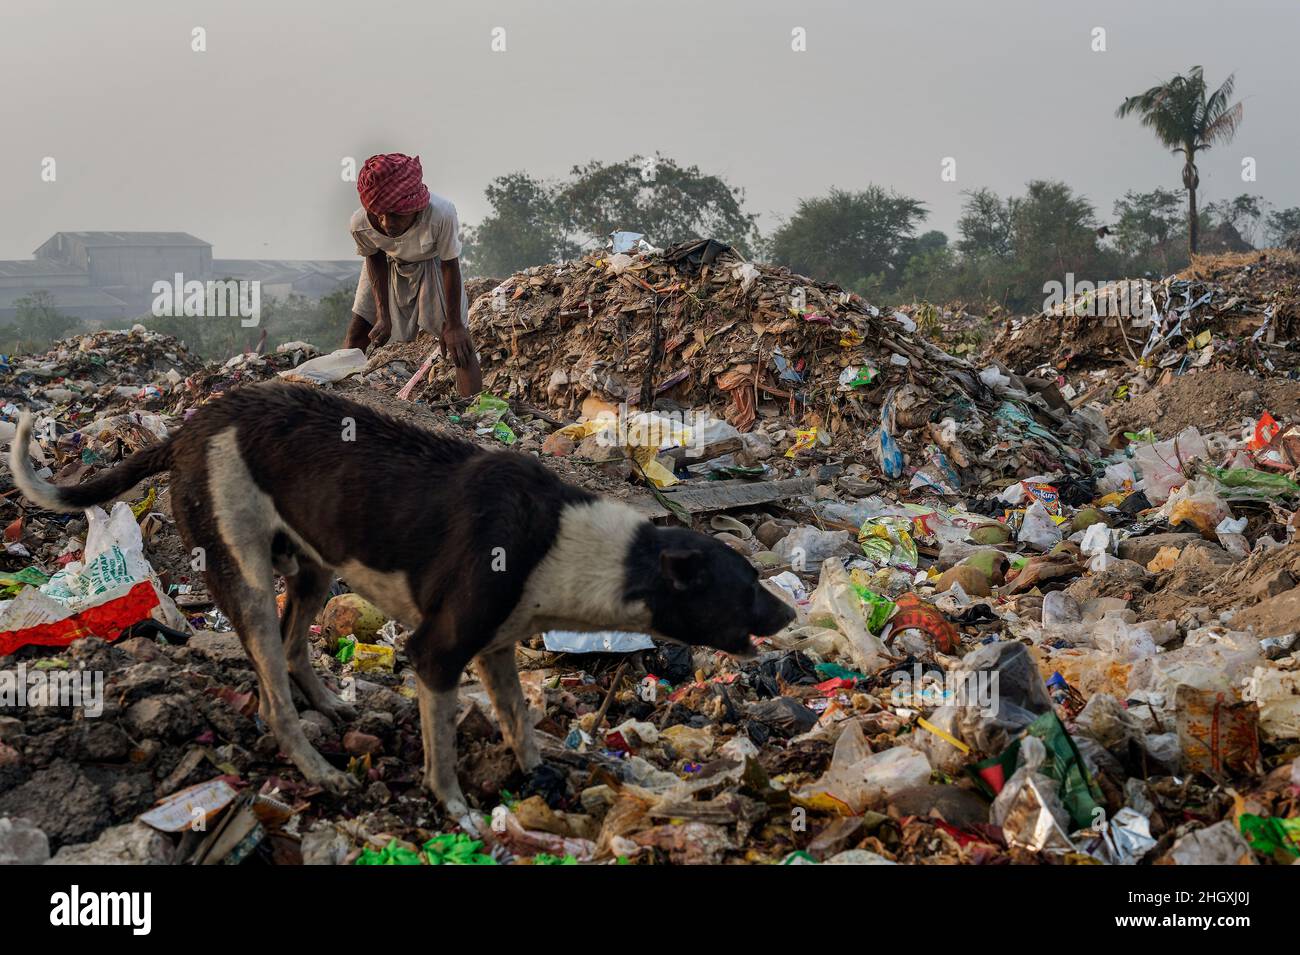 Dalit (untouchable) workers collect and sort waste in Garbage City, the largest landfill in the city of Kolkata (Calcutta), India Stock Photo